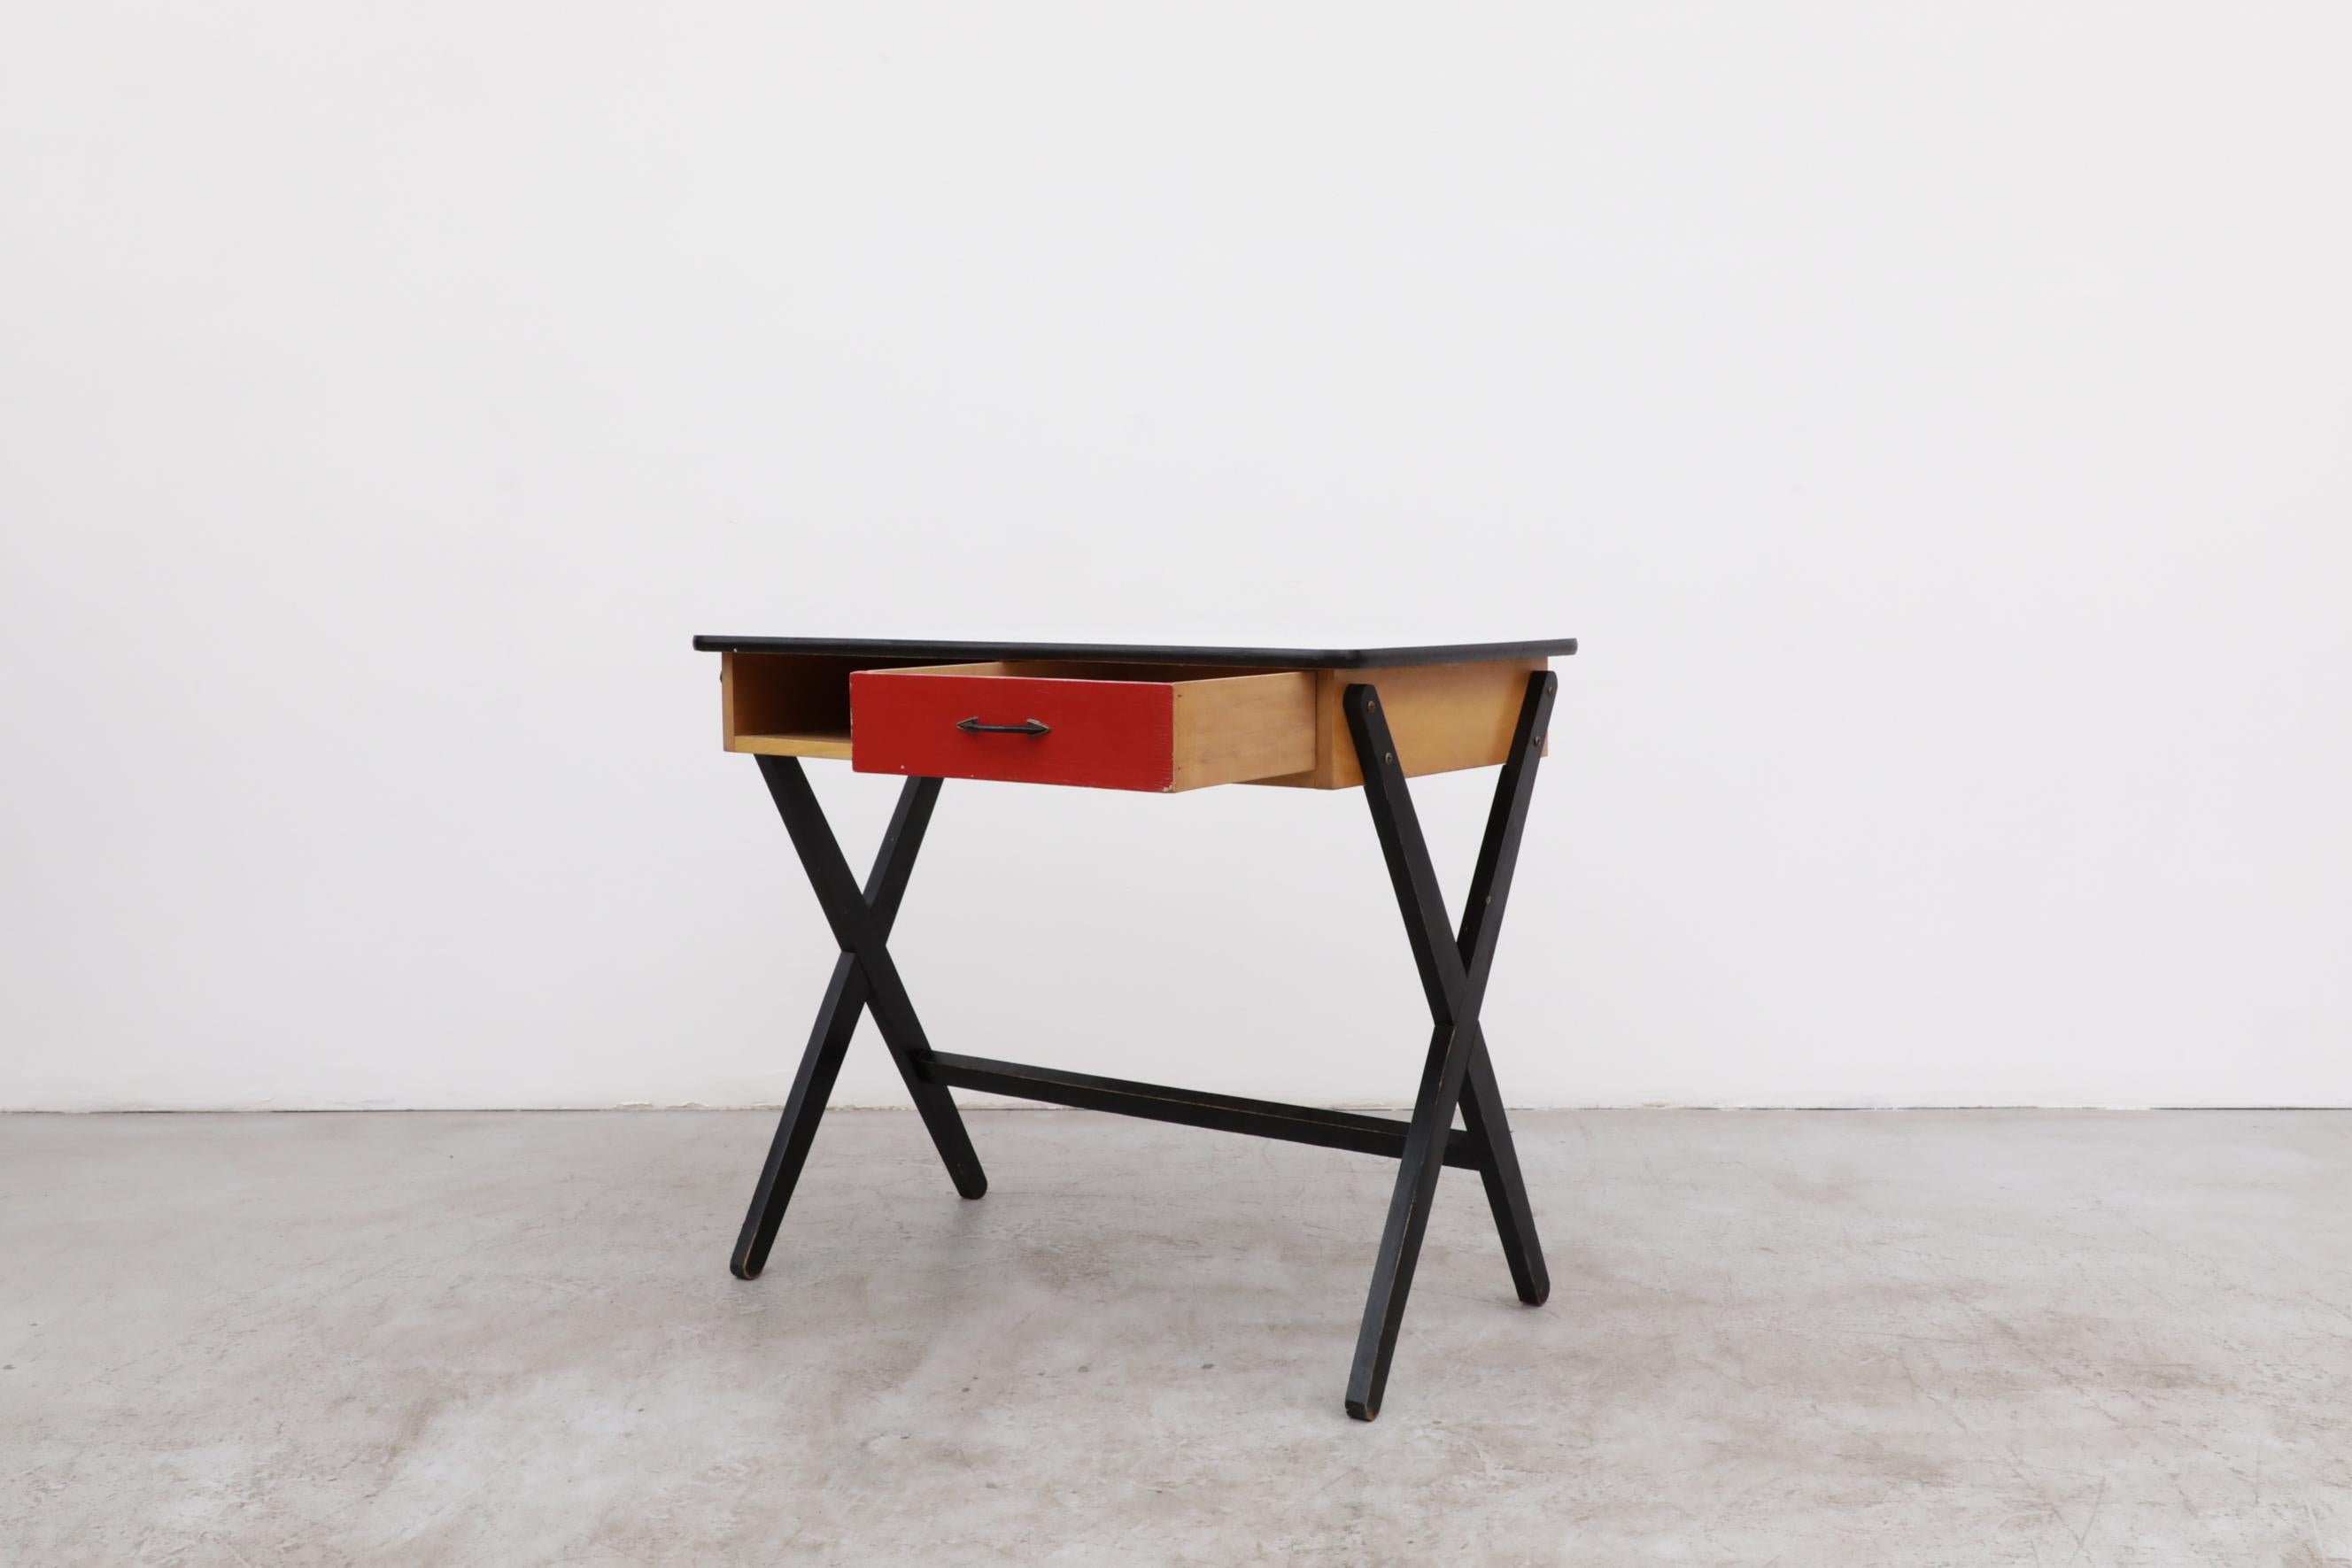 1954 Coen de Vries Desk in Birch w/ Ebony Base, Red Drawer and Formica Top For Sale 6